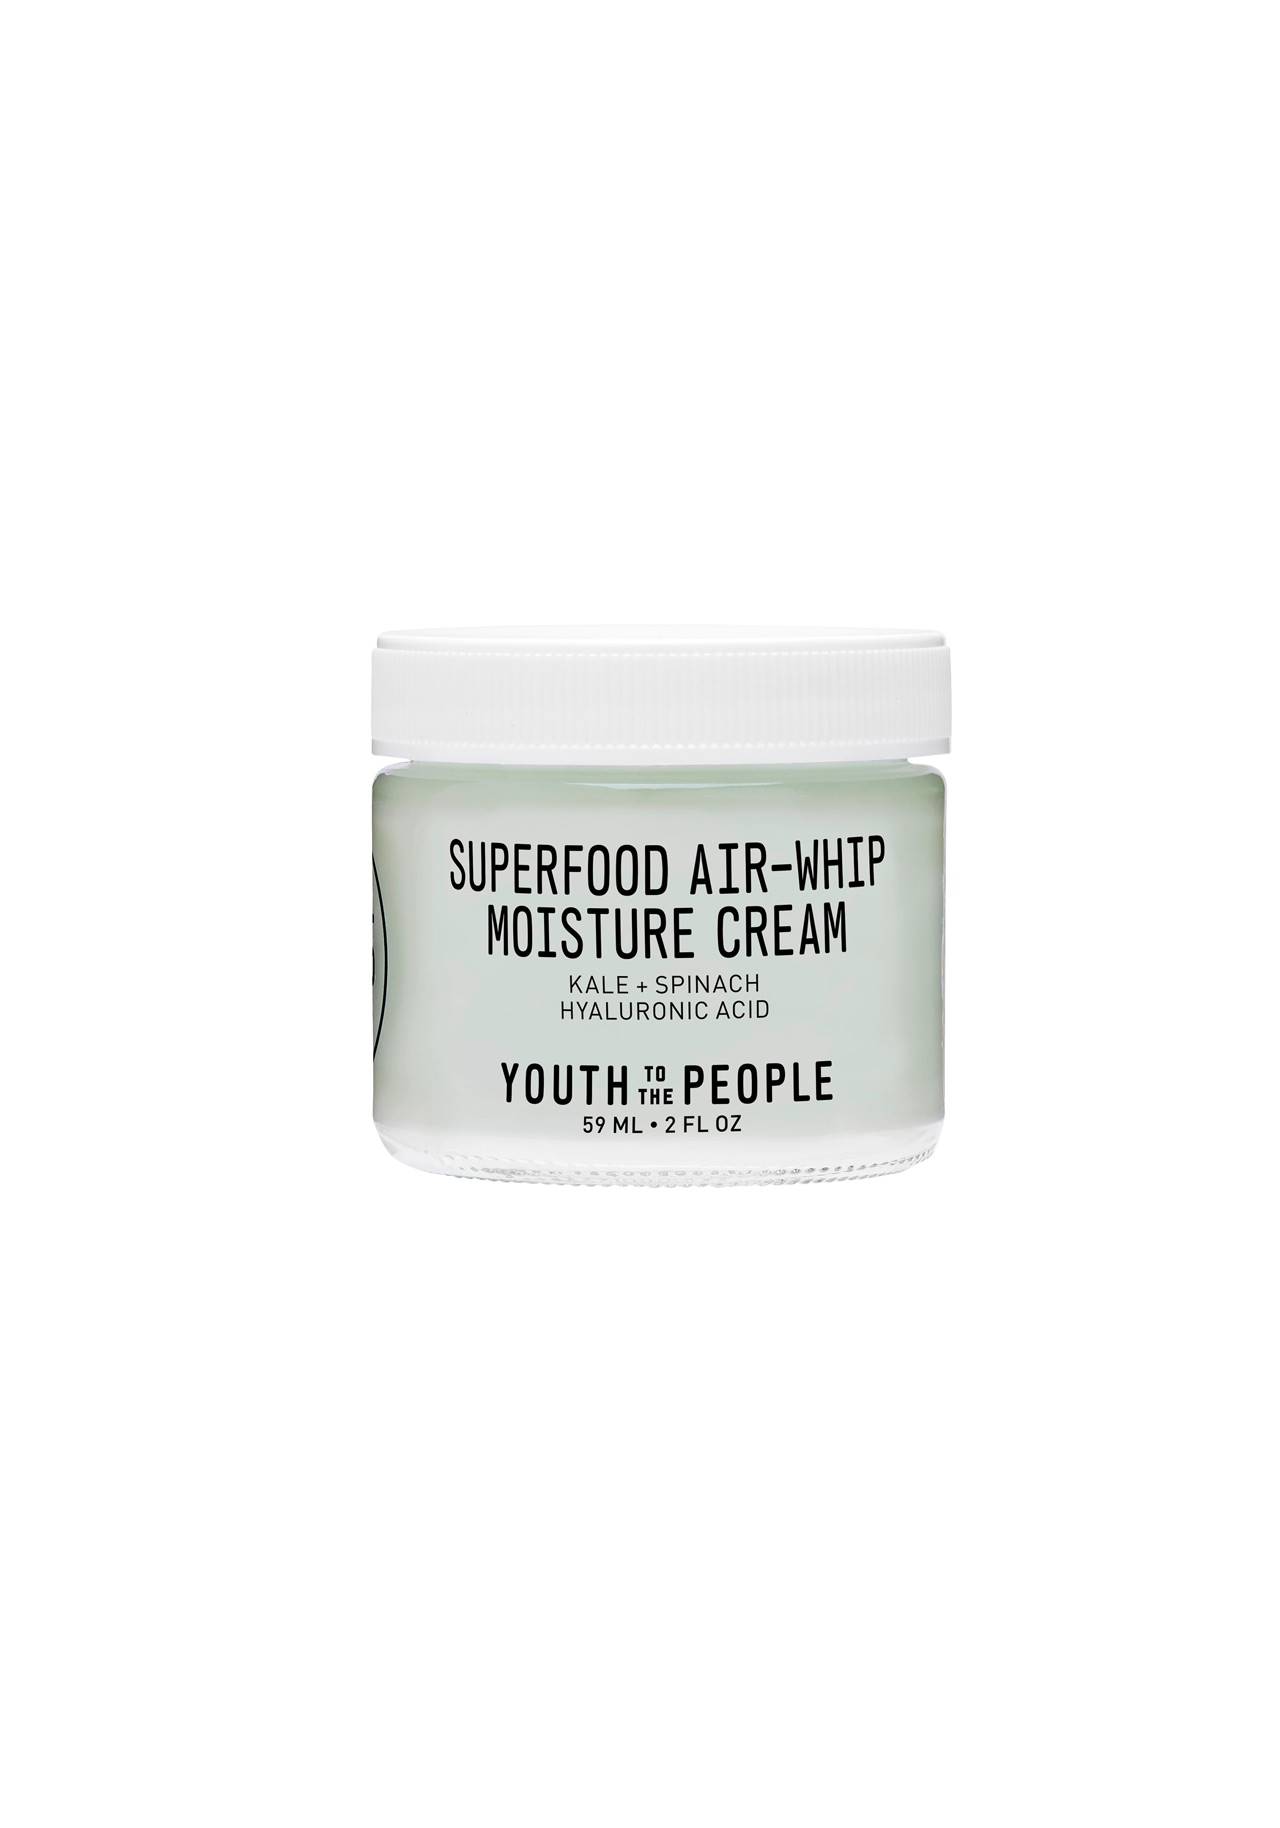 Cremas faciales naturales Crema hidratante Superfood Air-Whip de Youth to the People